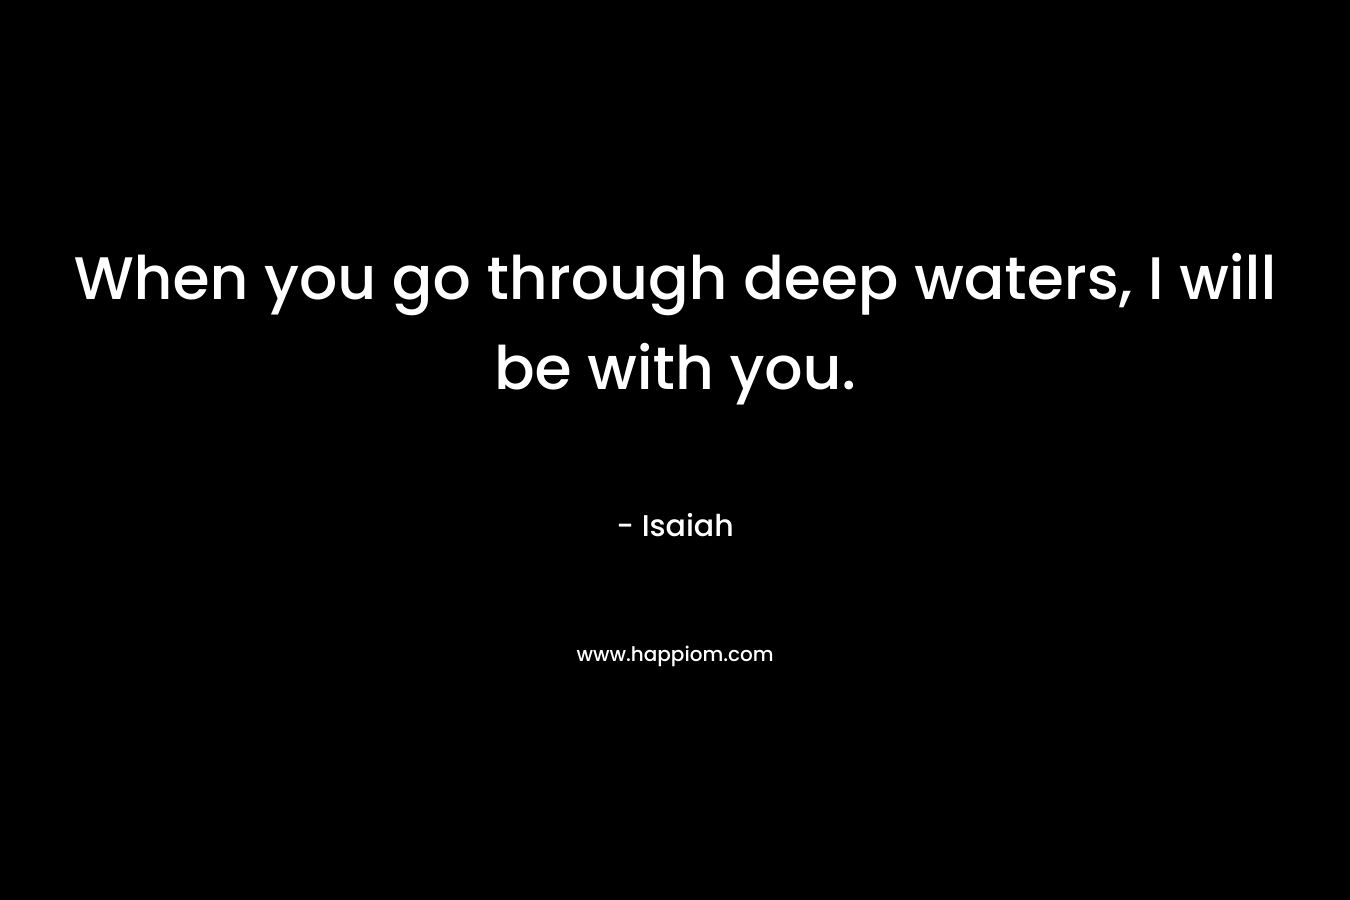 When you go through deep waters, I will be with you.